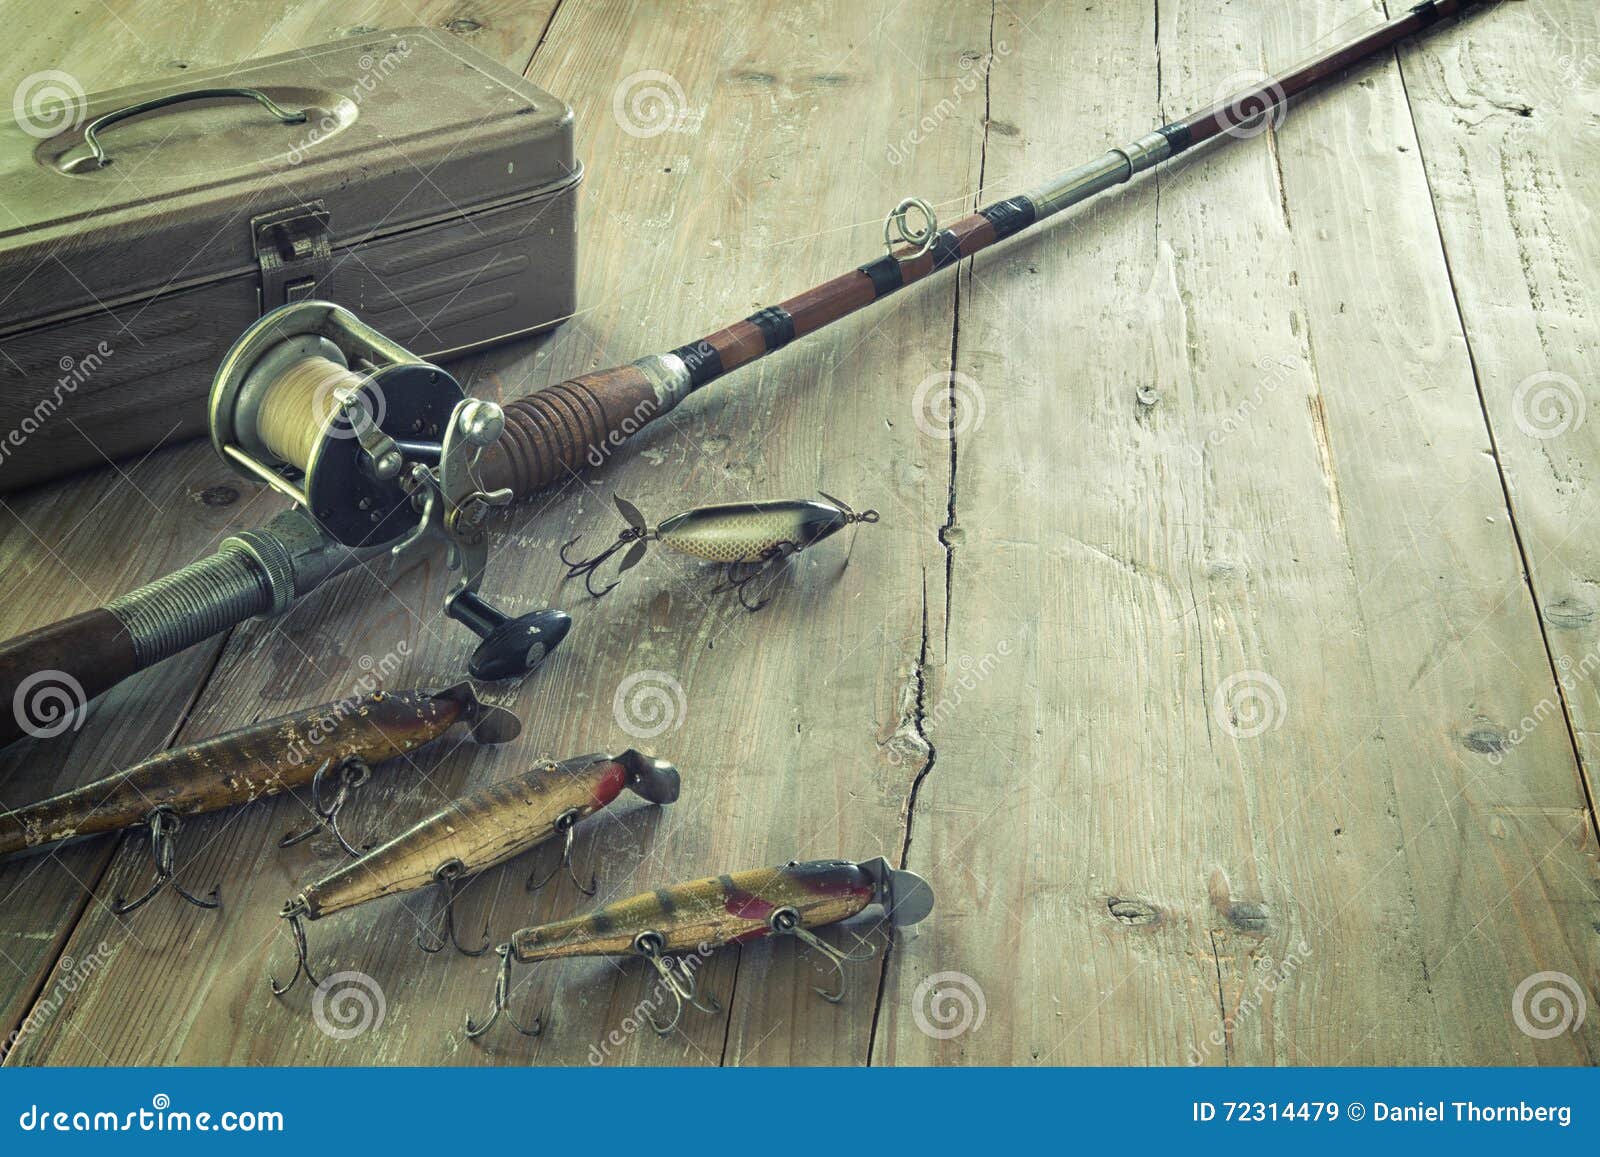 https://thumbs.dreamstime.com/z/antique-fishing-rod-lures-grunge-wood-surface-tackle-box-bait-casting-72314479.jpg